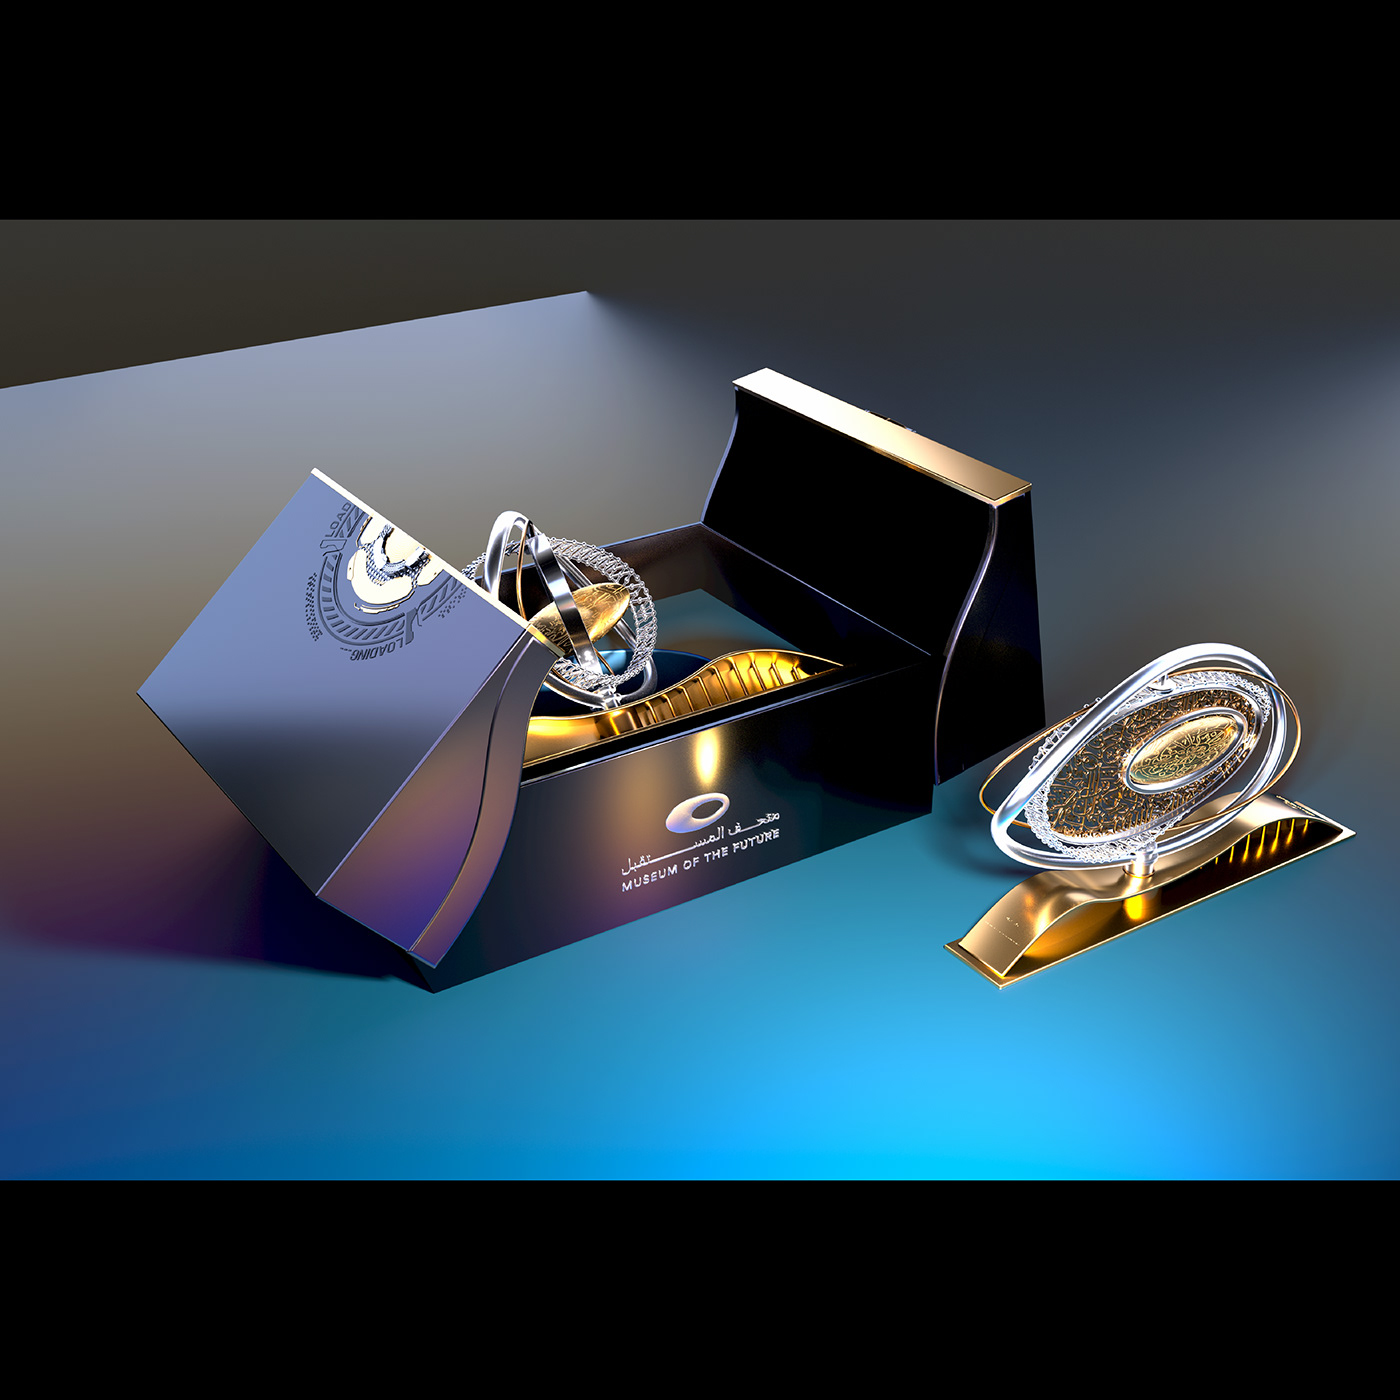 3ds max CGI product design  industrial concept Advertising  design abedmarzouk Calligraphy   museumofthefuture